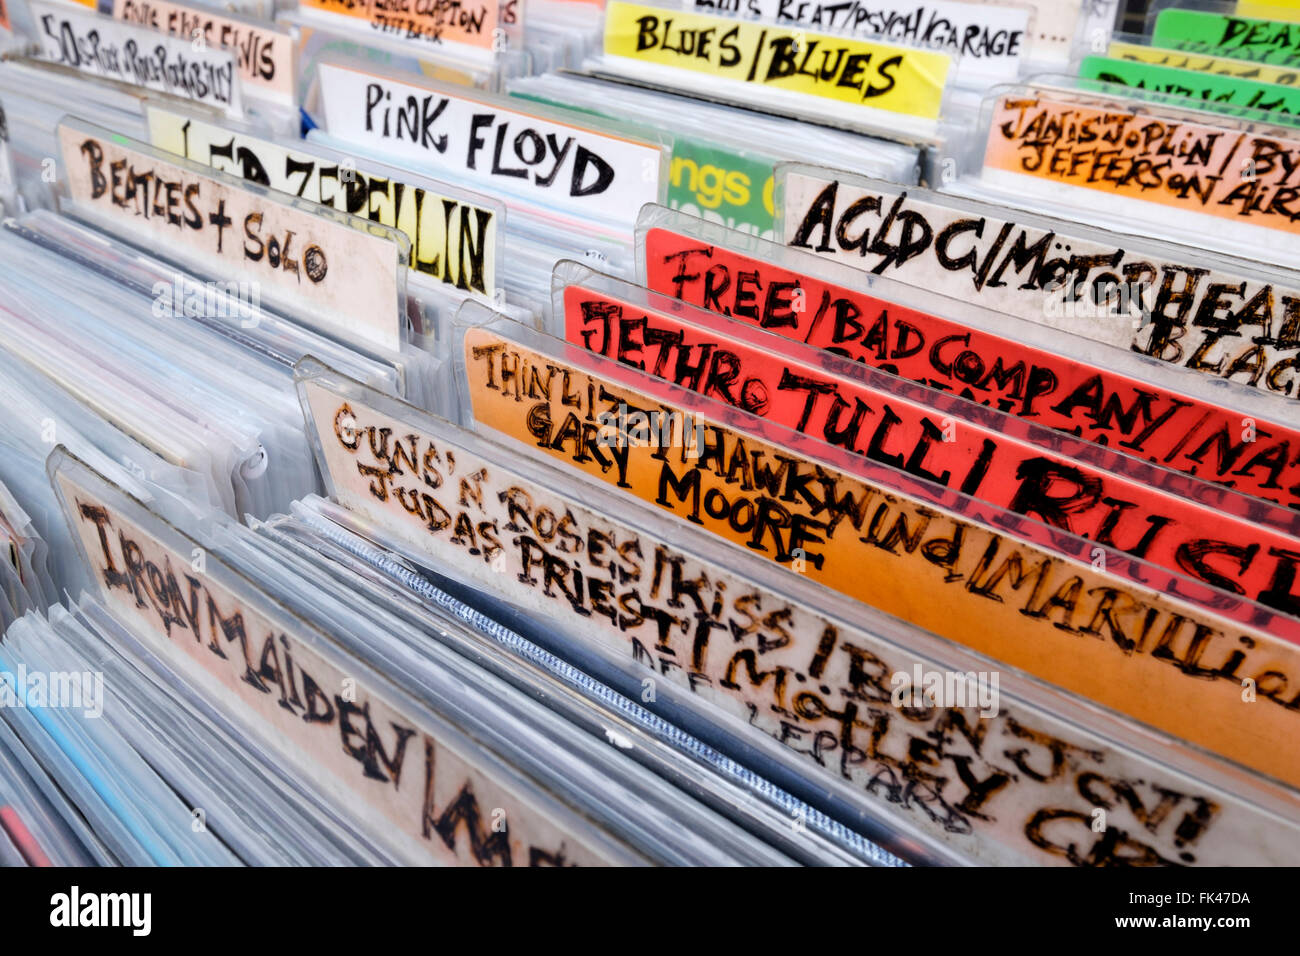 1970's prog rock vinyl records on sale at a market stall in Camden Town, London Stock Photo